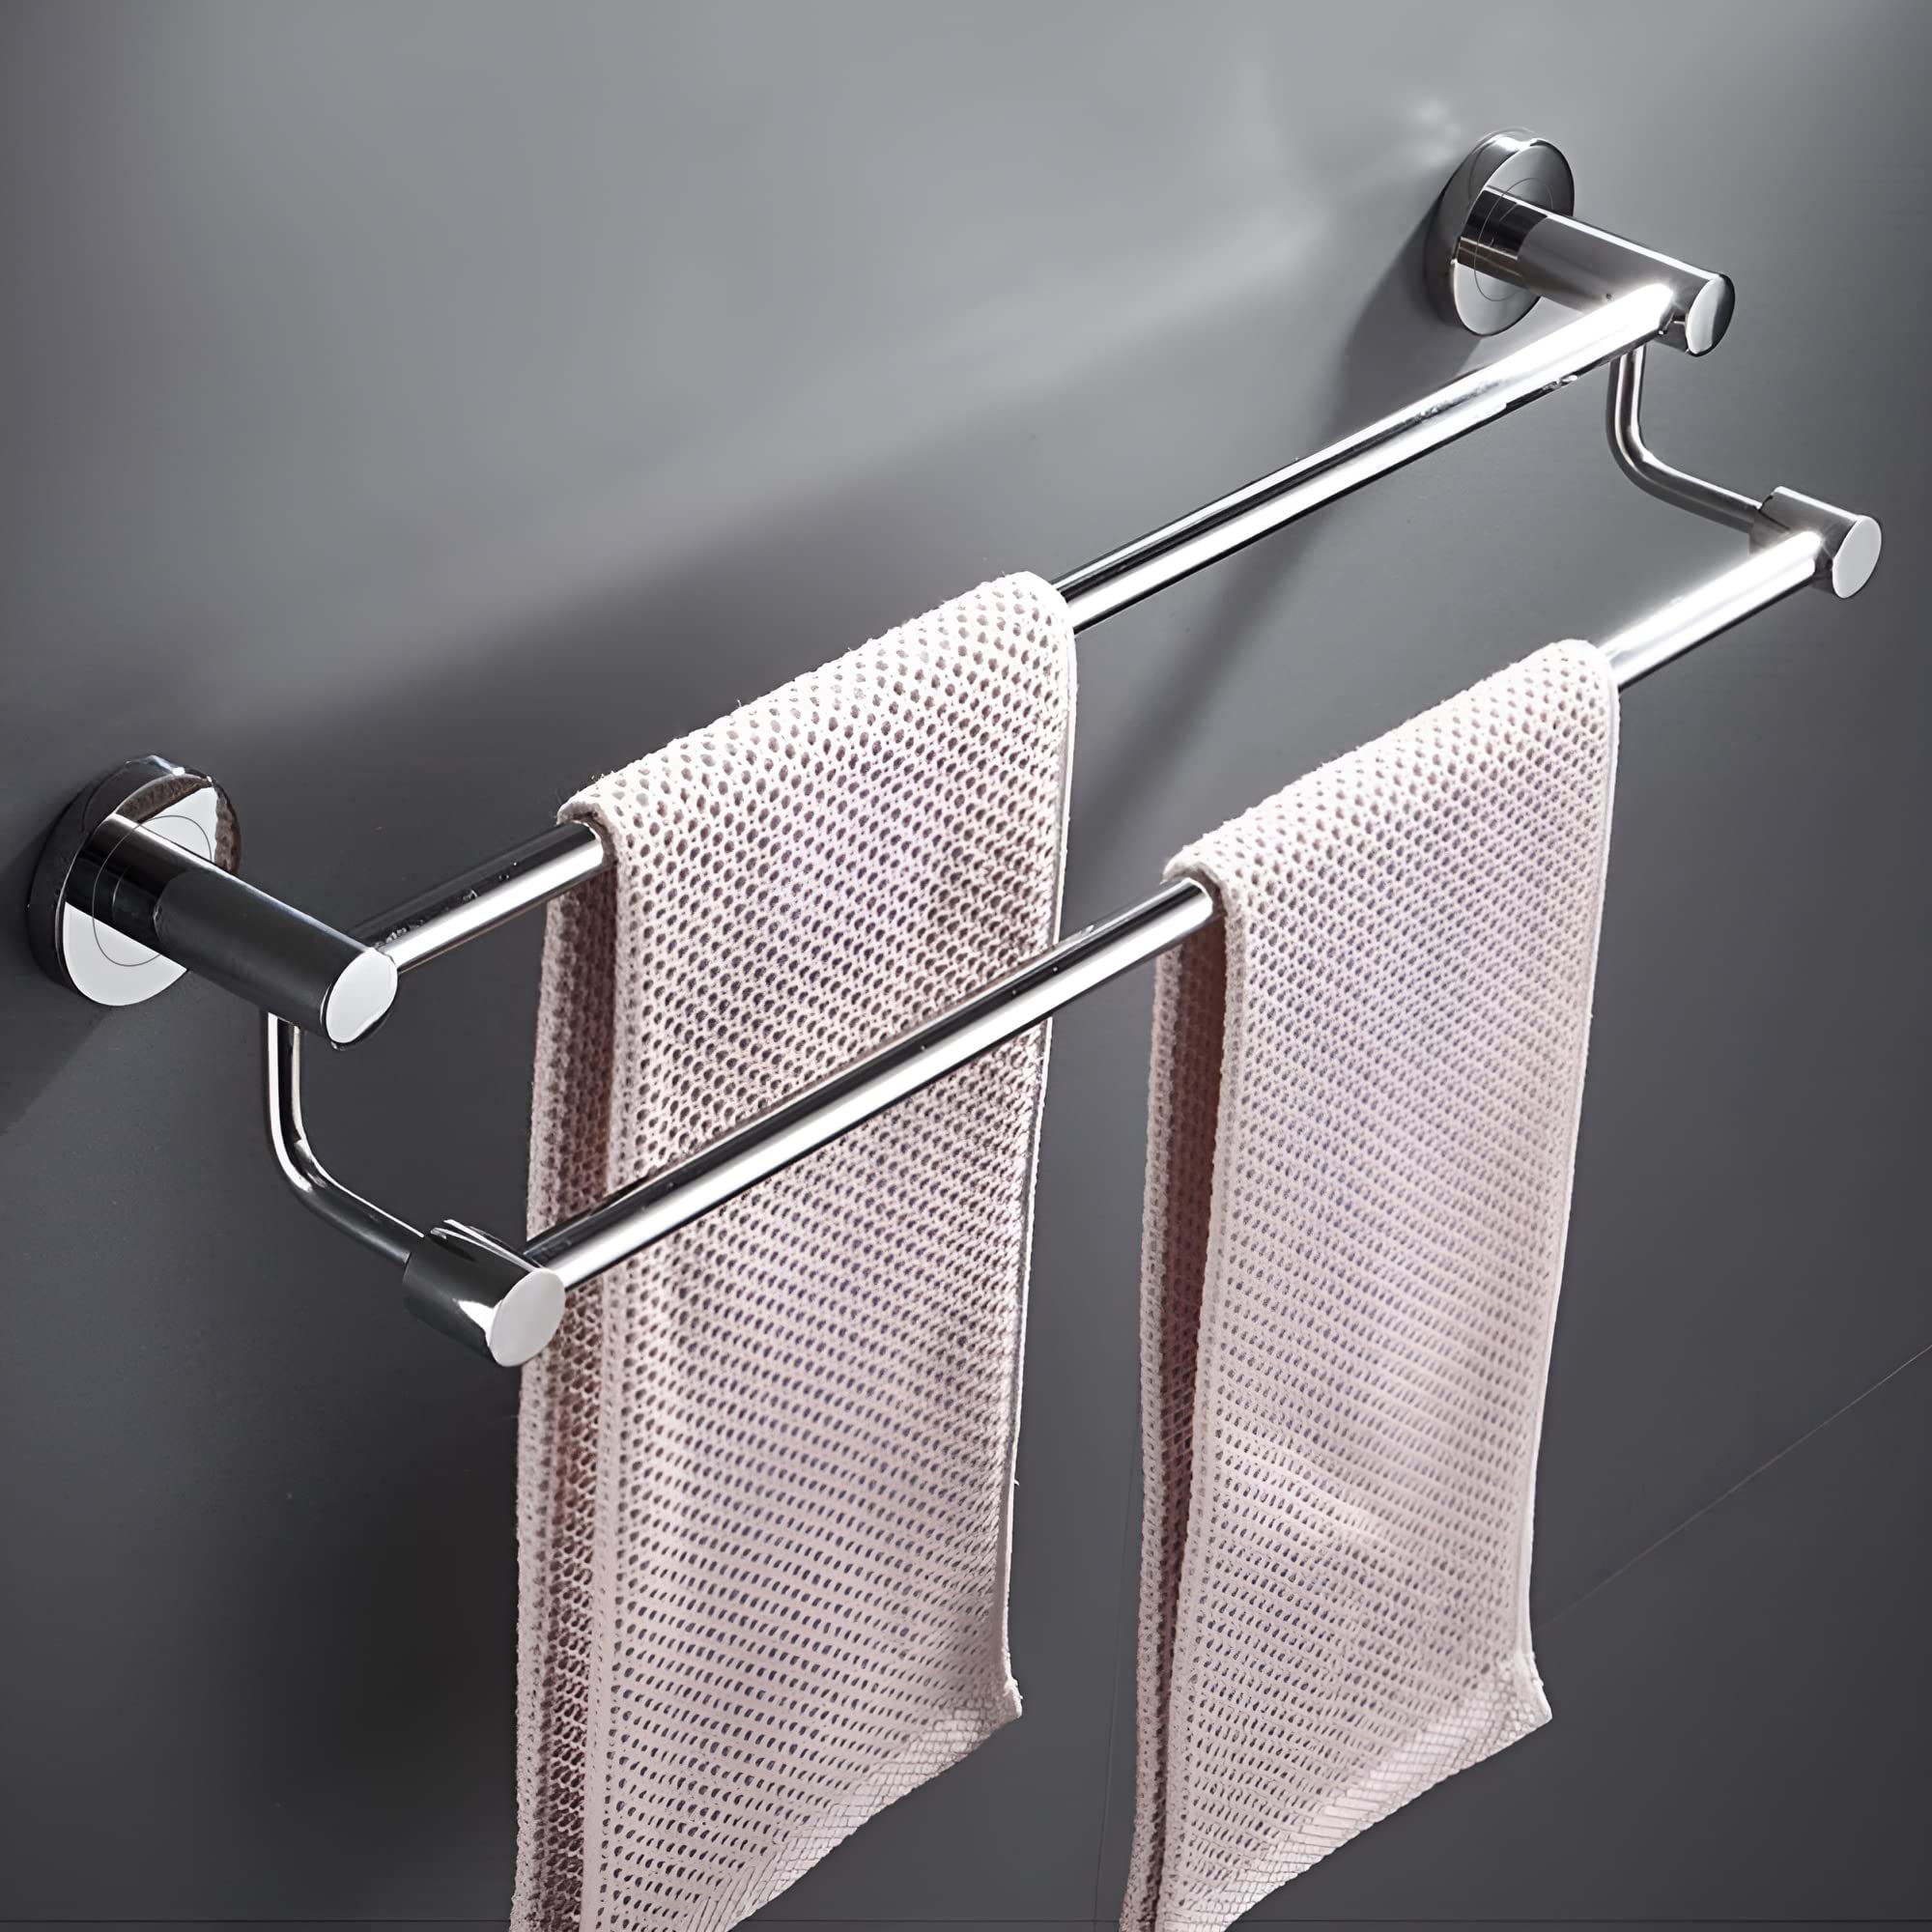 Plantex Stainless Steel Towel Rod/Towel Rack for Bathroom/Towel Bar/Hanger/Stand/Bathroom Accessories (24 Inch - Chrome Finish) - Pack of 3